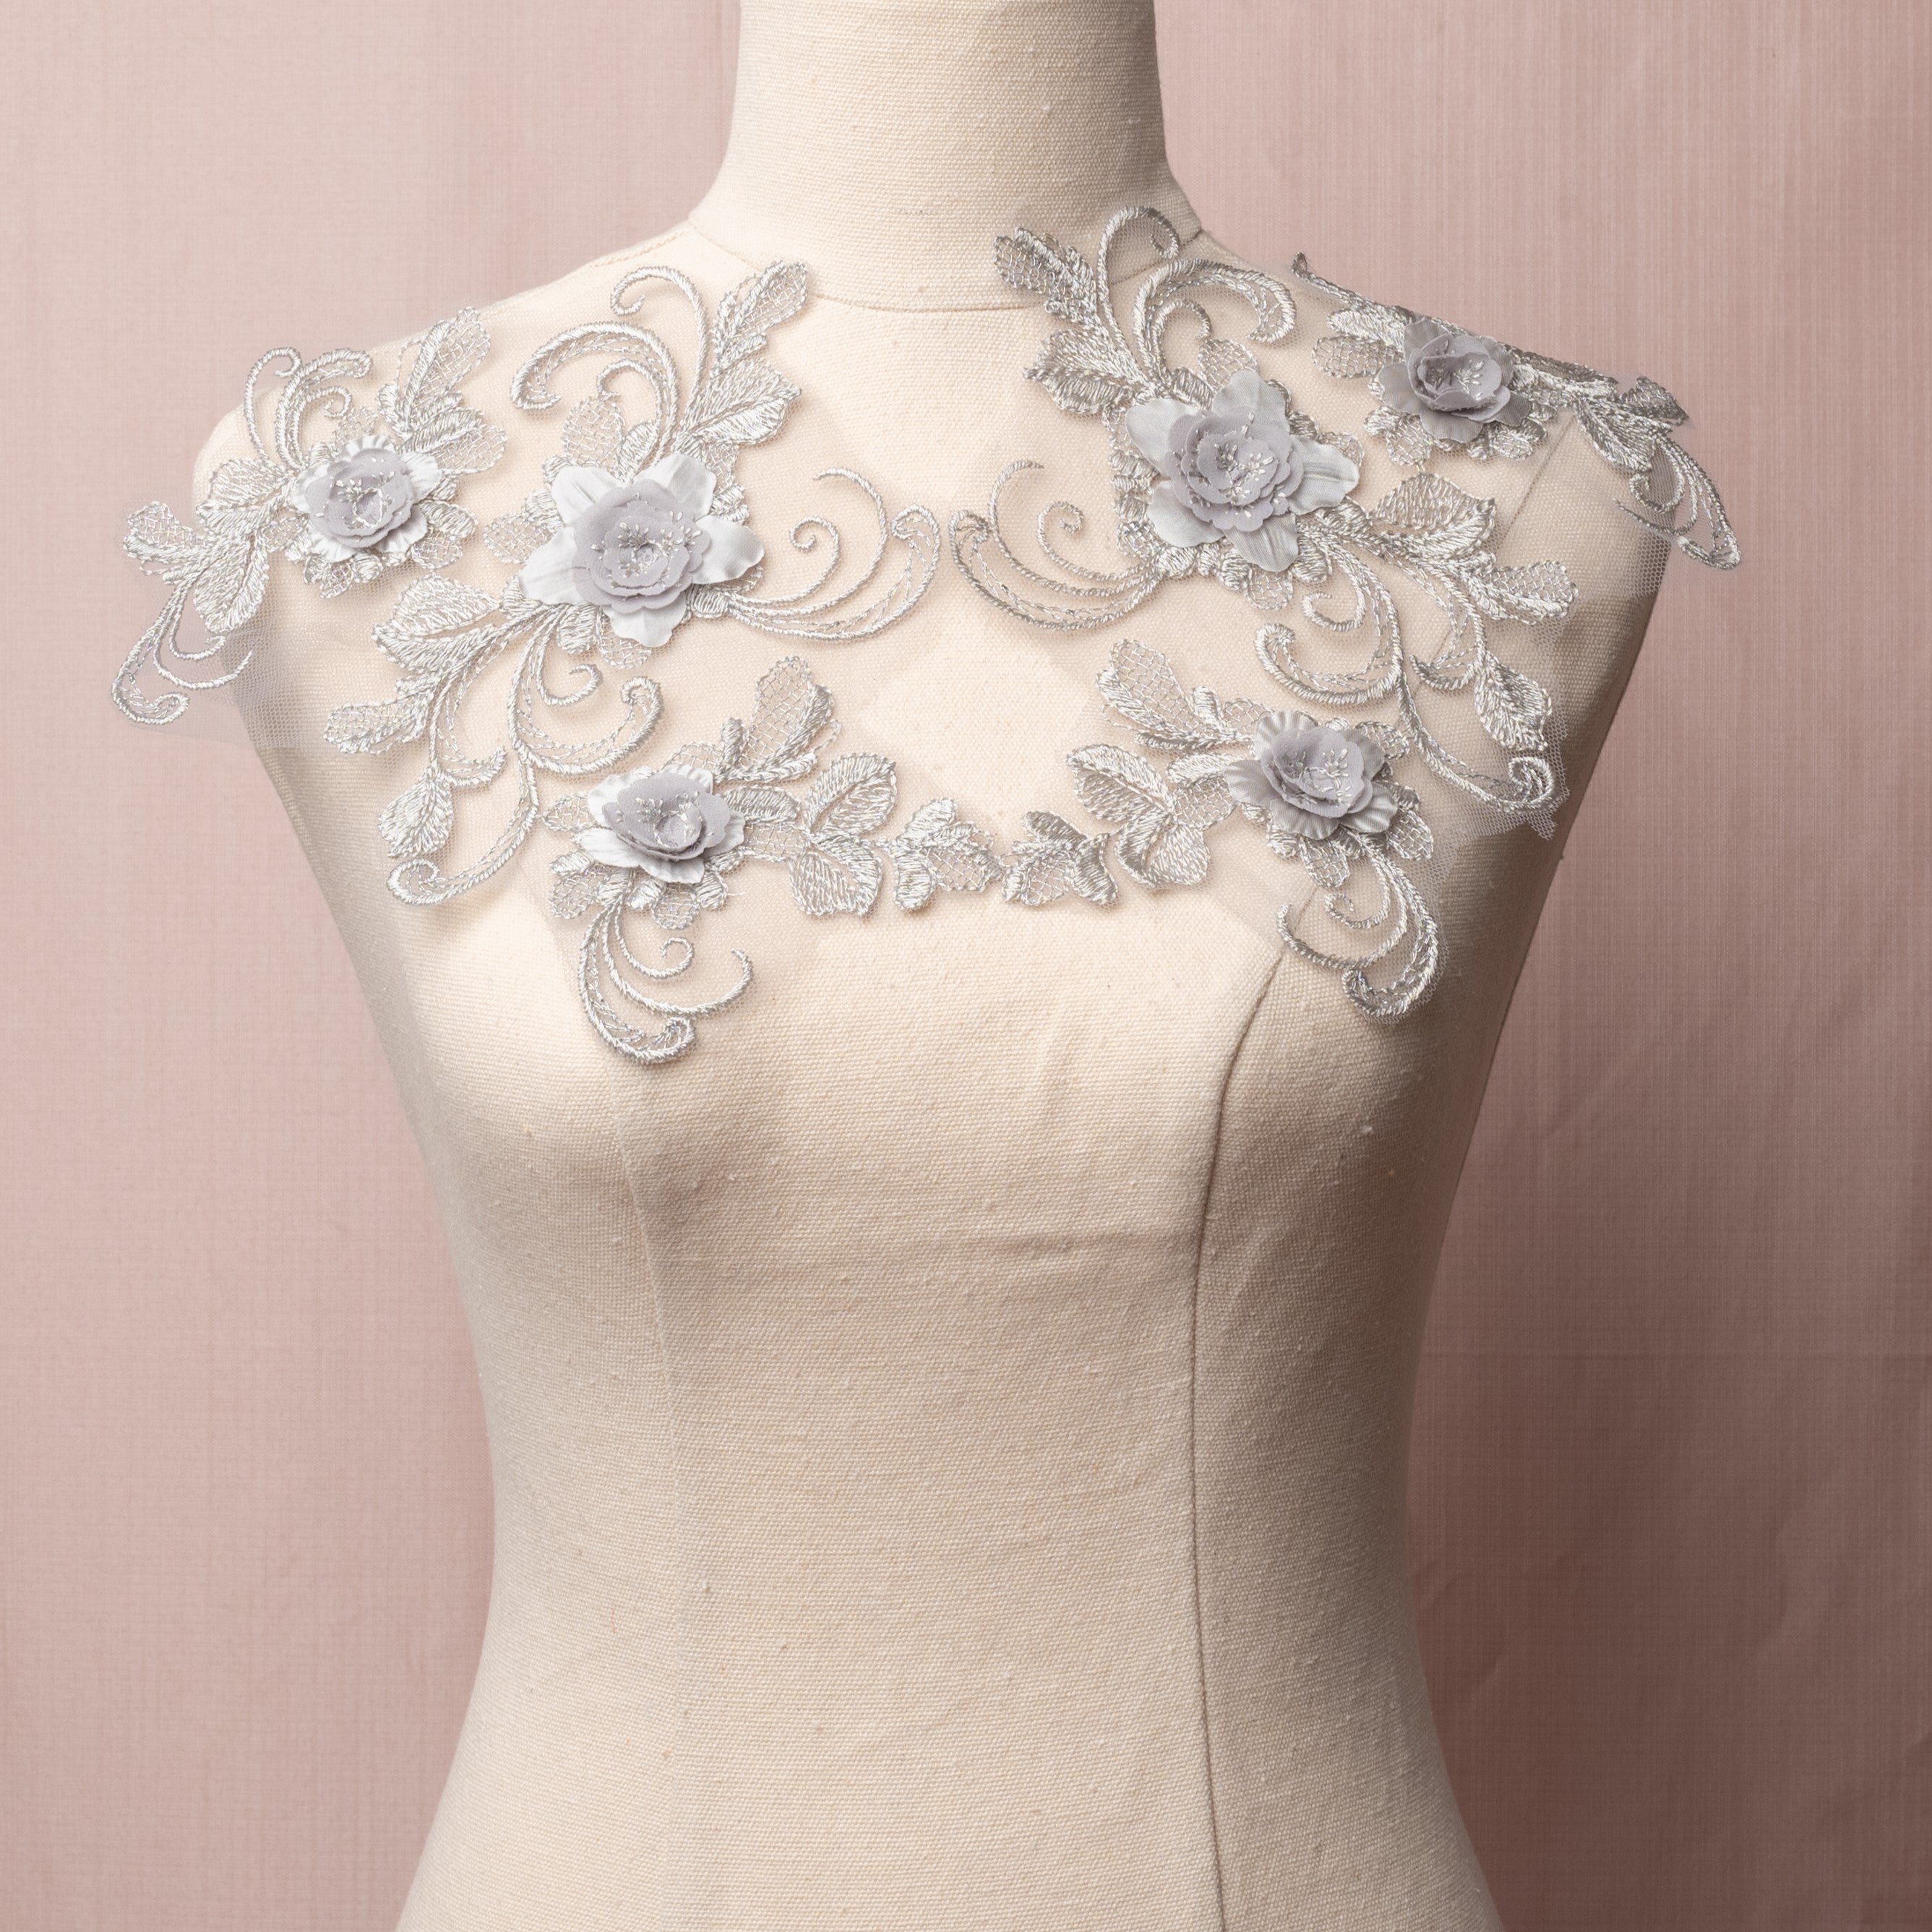 Grey lace applique pair with an open romantic design of swirling stems, cross hatched leaves and 3D rose like flowers.  The appliques are displayed on a mannequin. 